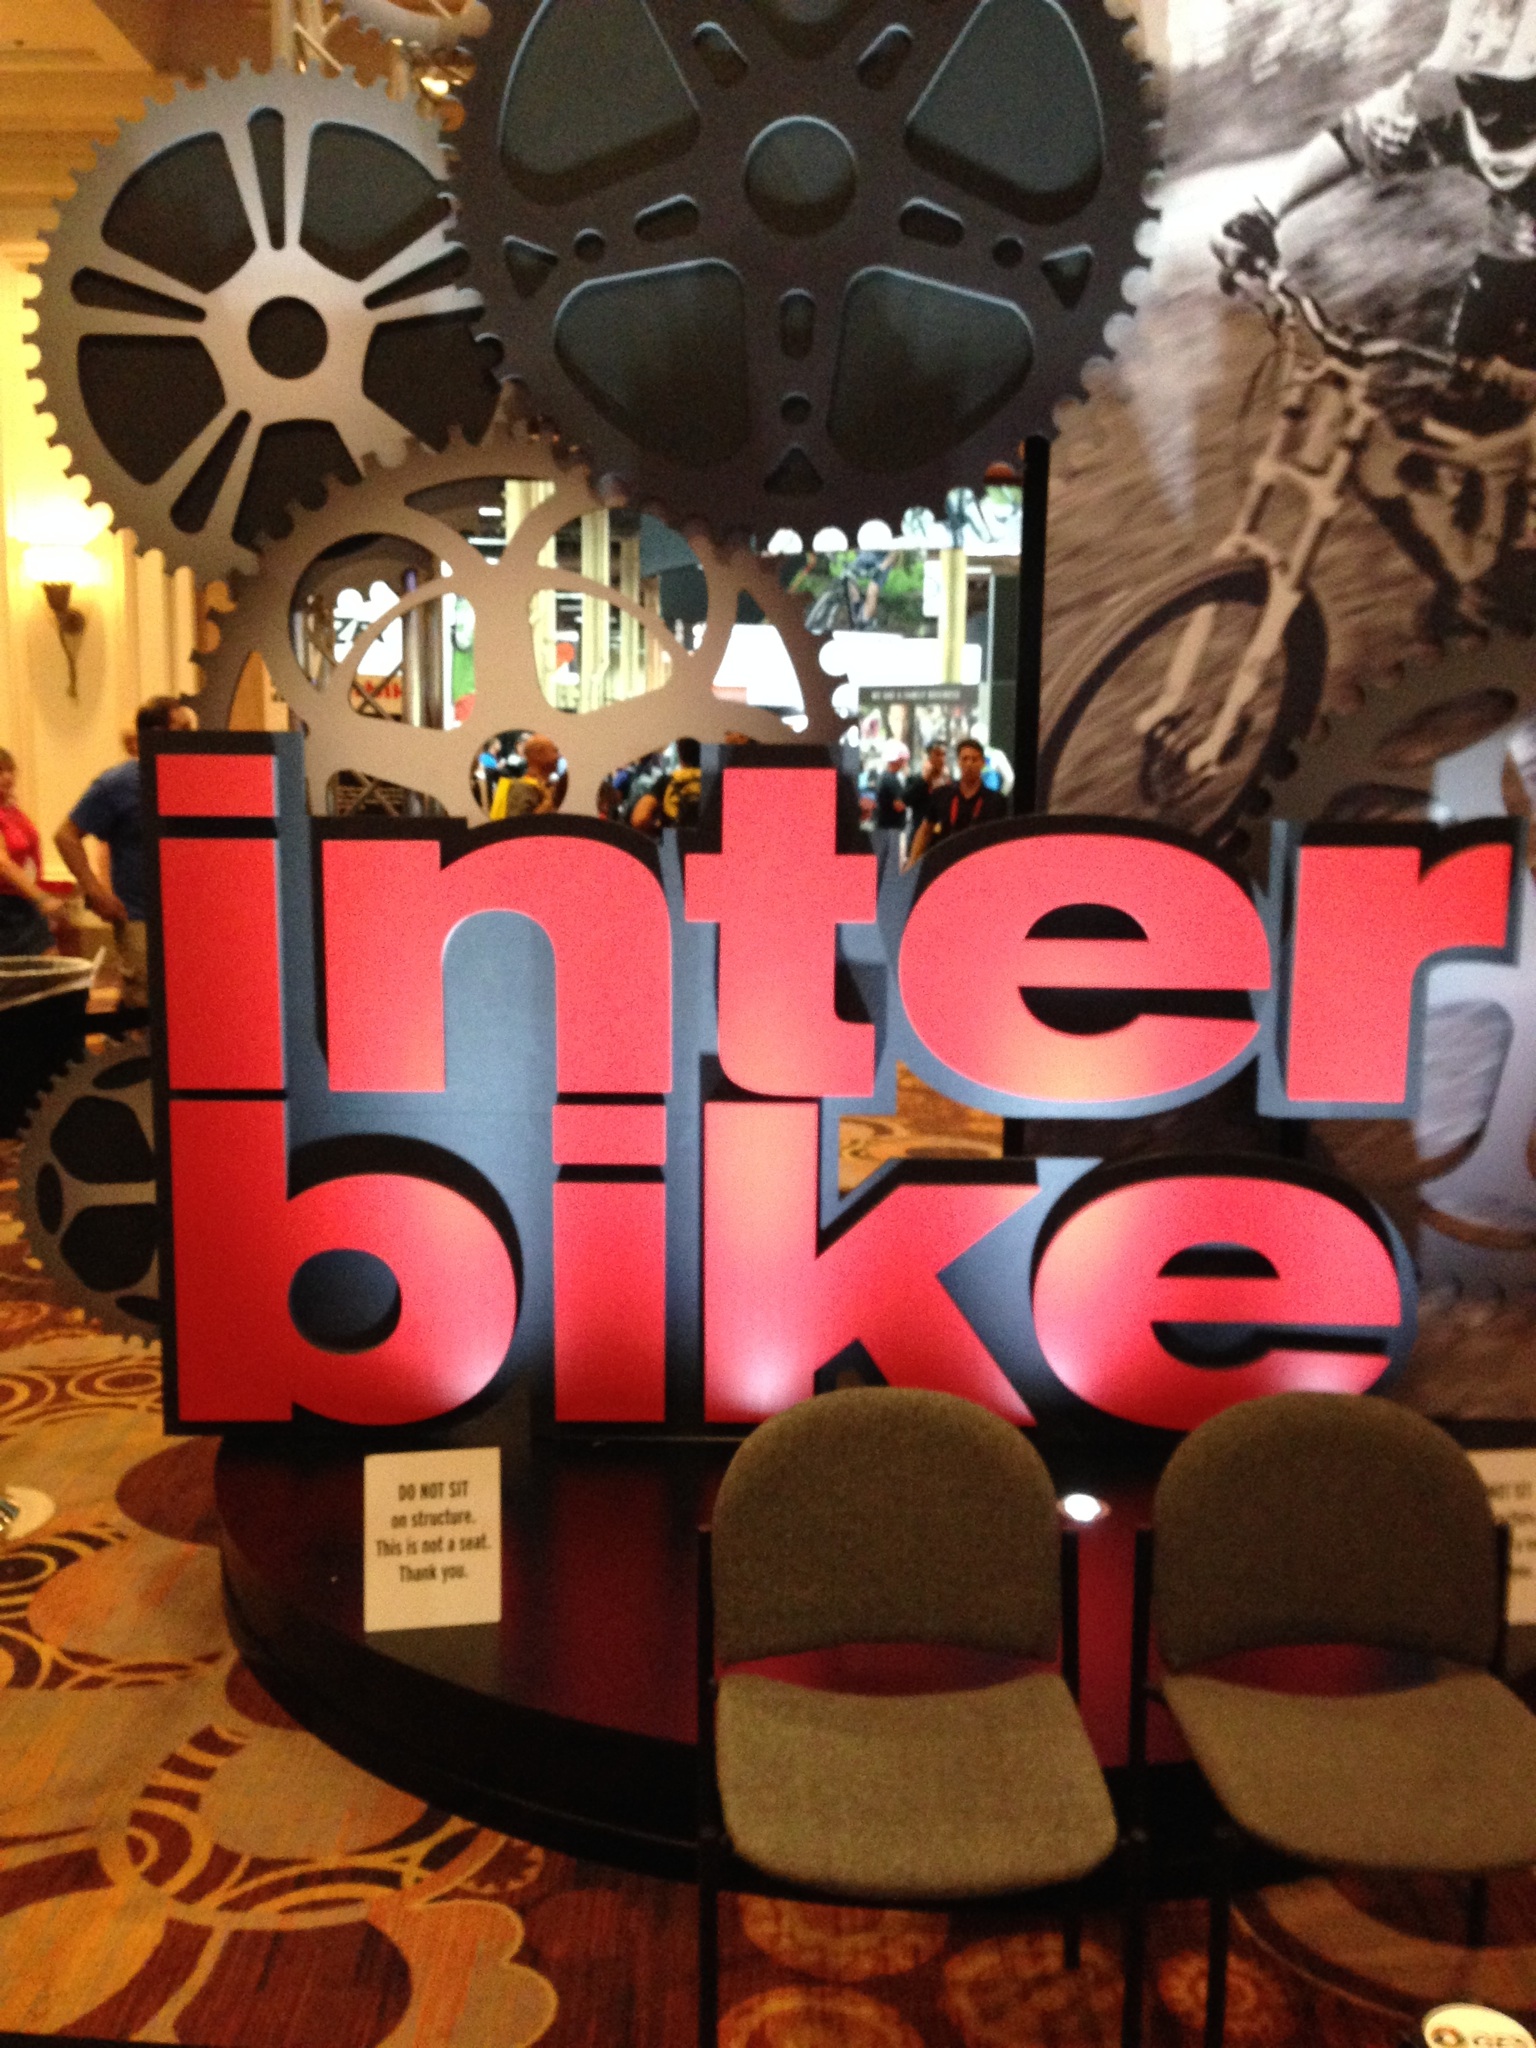 Interbike 2014:  No Disappointment!